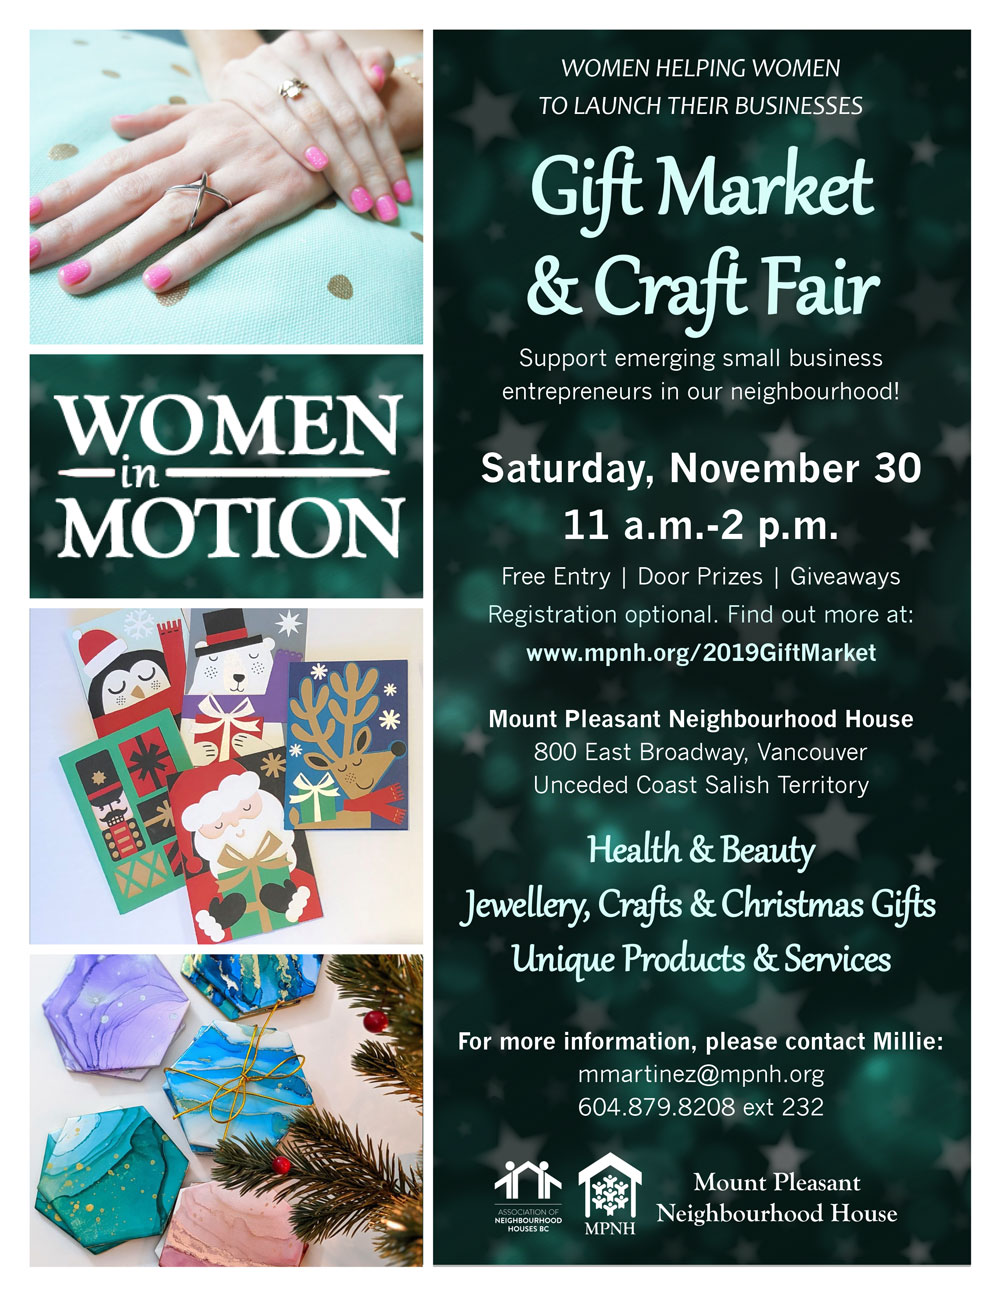 An image of the poster with event details, featuring photos of unique gifts and services.